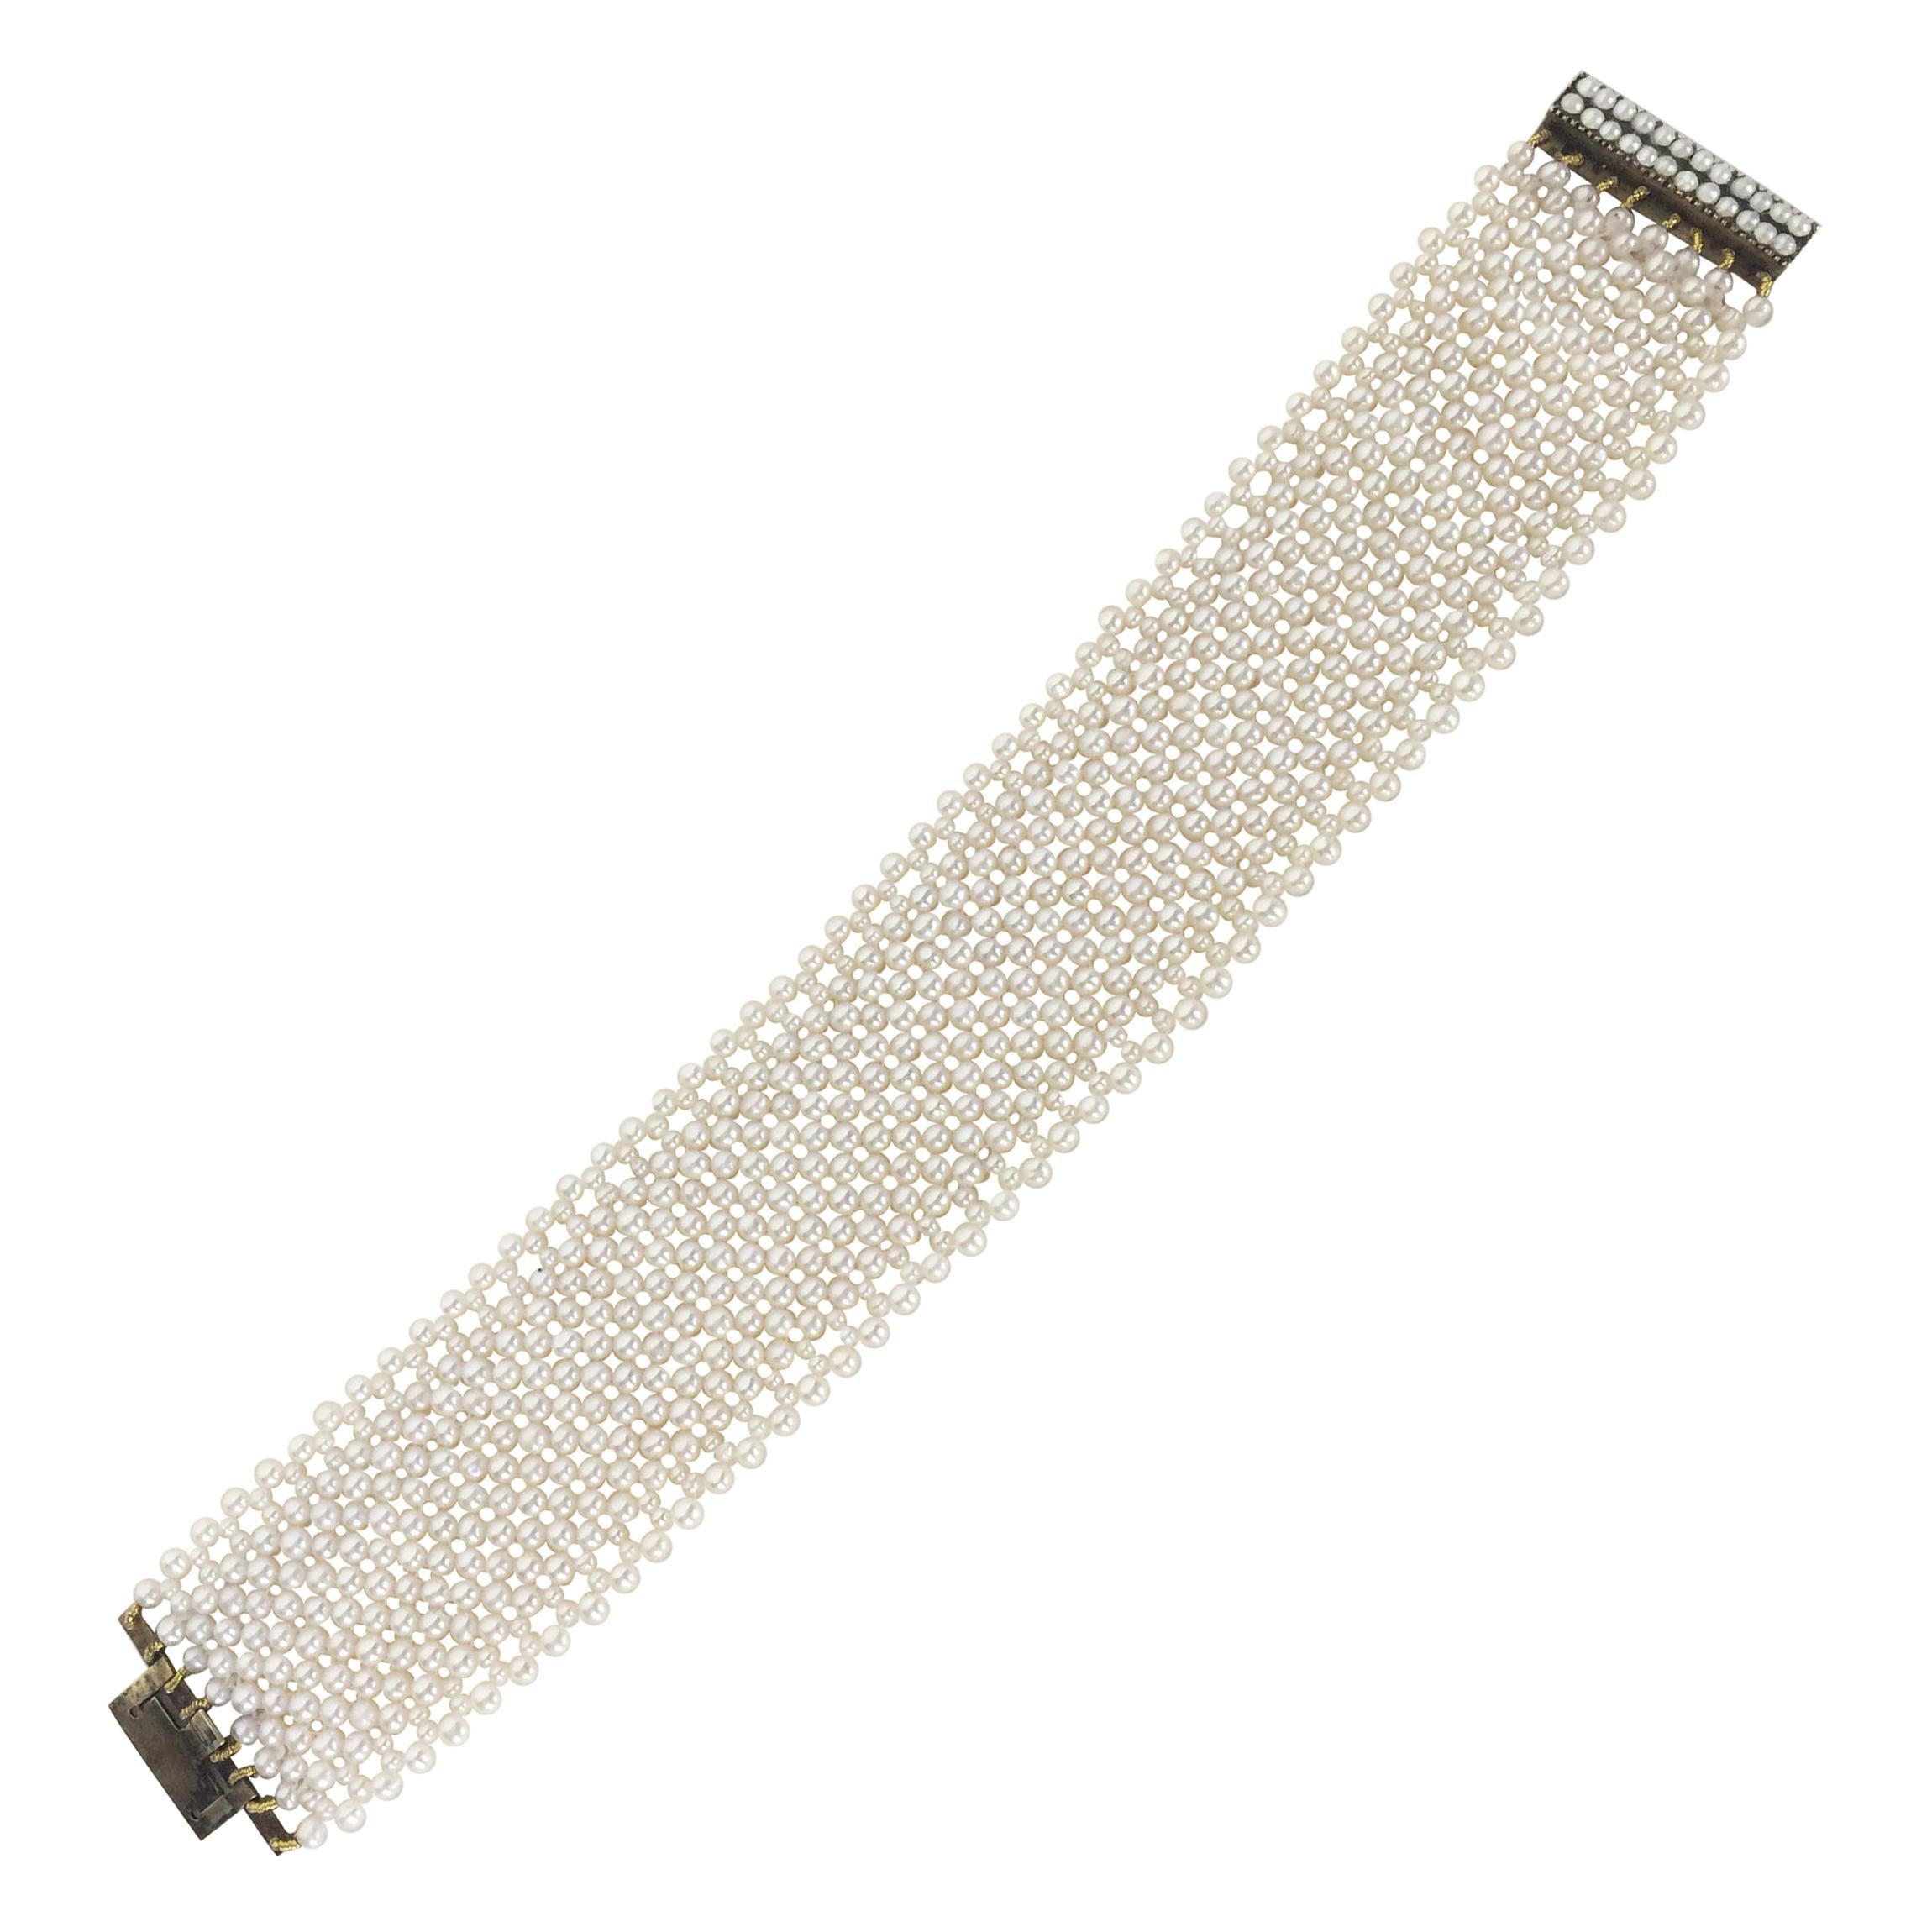 Marina J. Fine Woven Pearl Bracelet with Original Pearls on Gold Vintage clasp